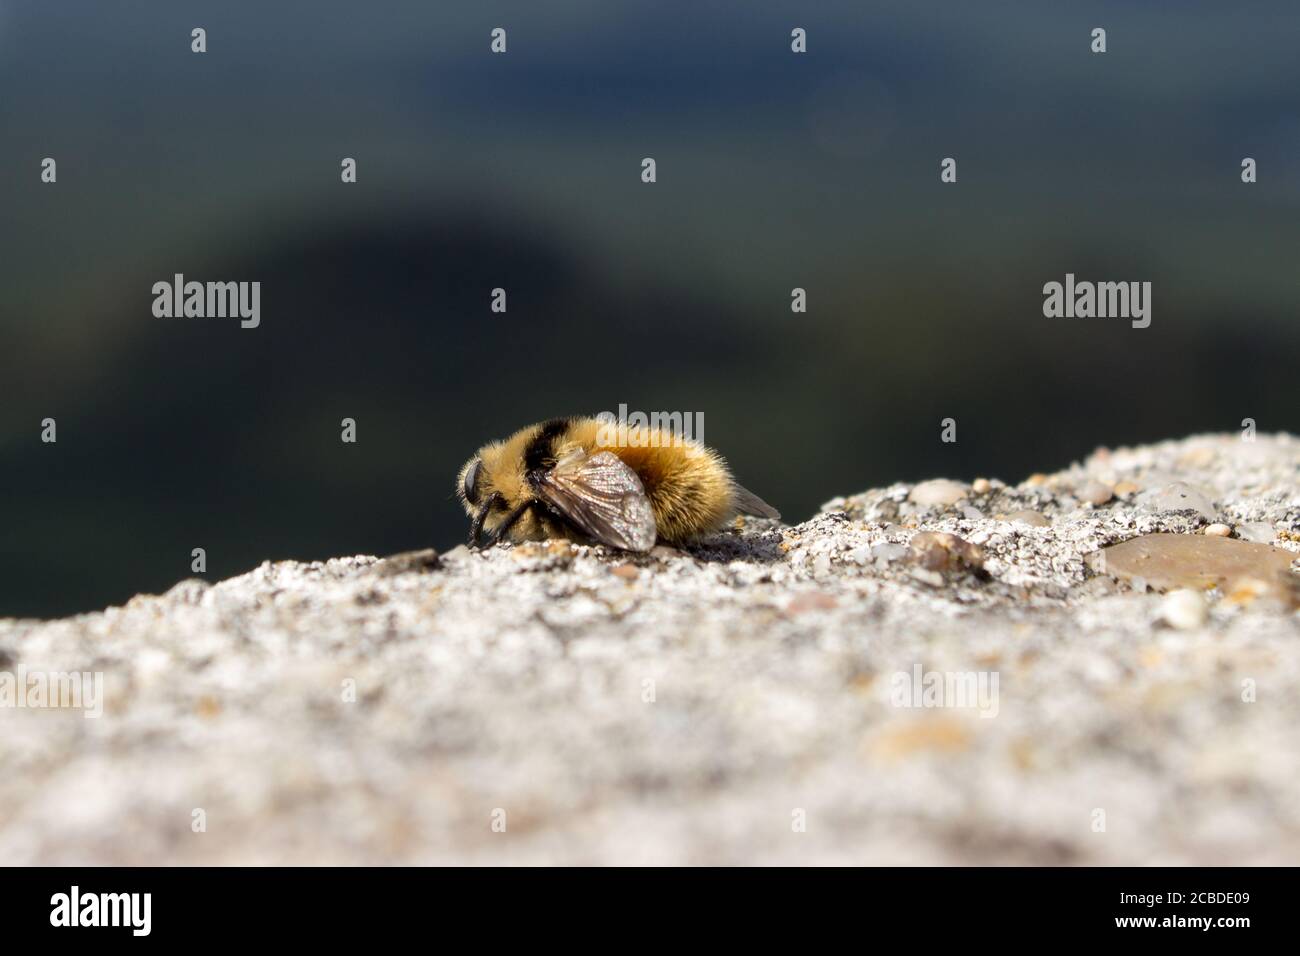 A wild bee sits on a stone. Focus on the bee. Stock Photo